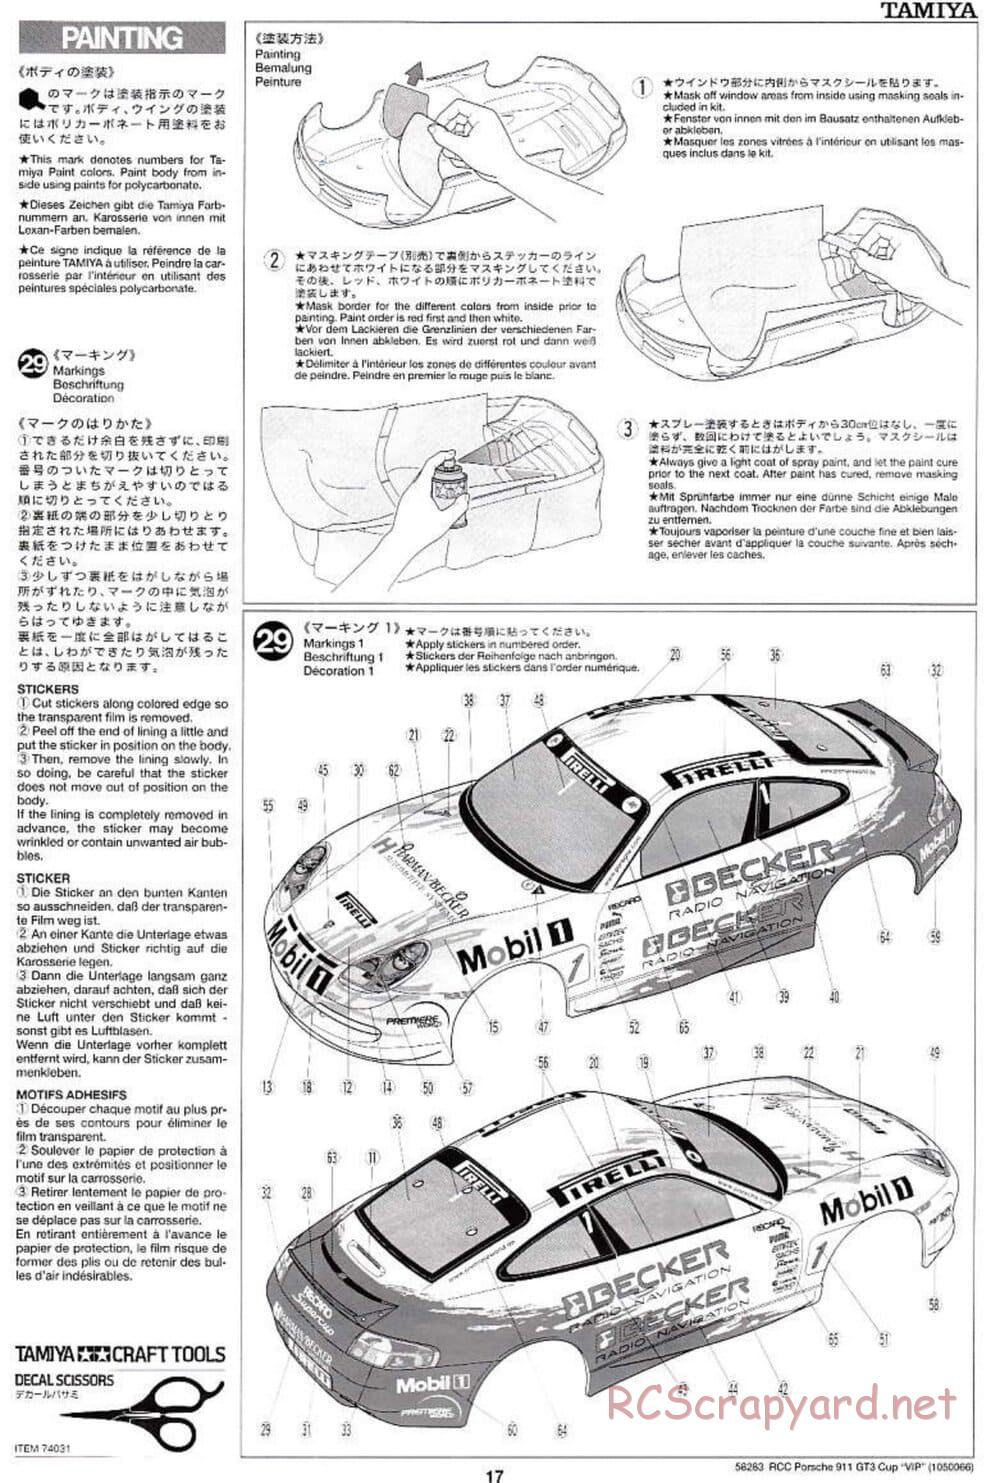 Tamiya - Porsche 911 GT3 Cup VIP - TL-01 Chassis - Manual - Page 17